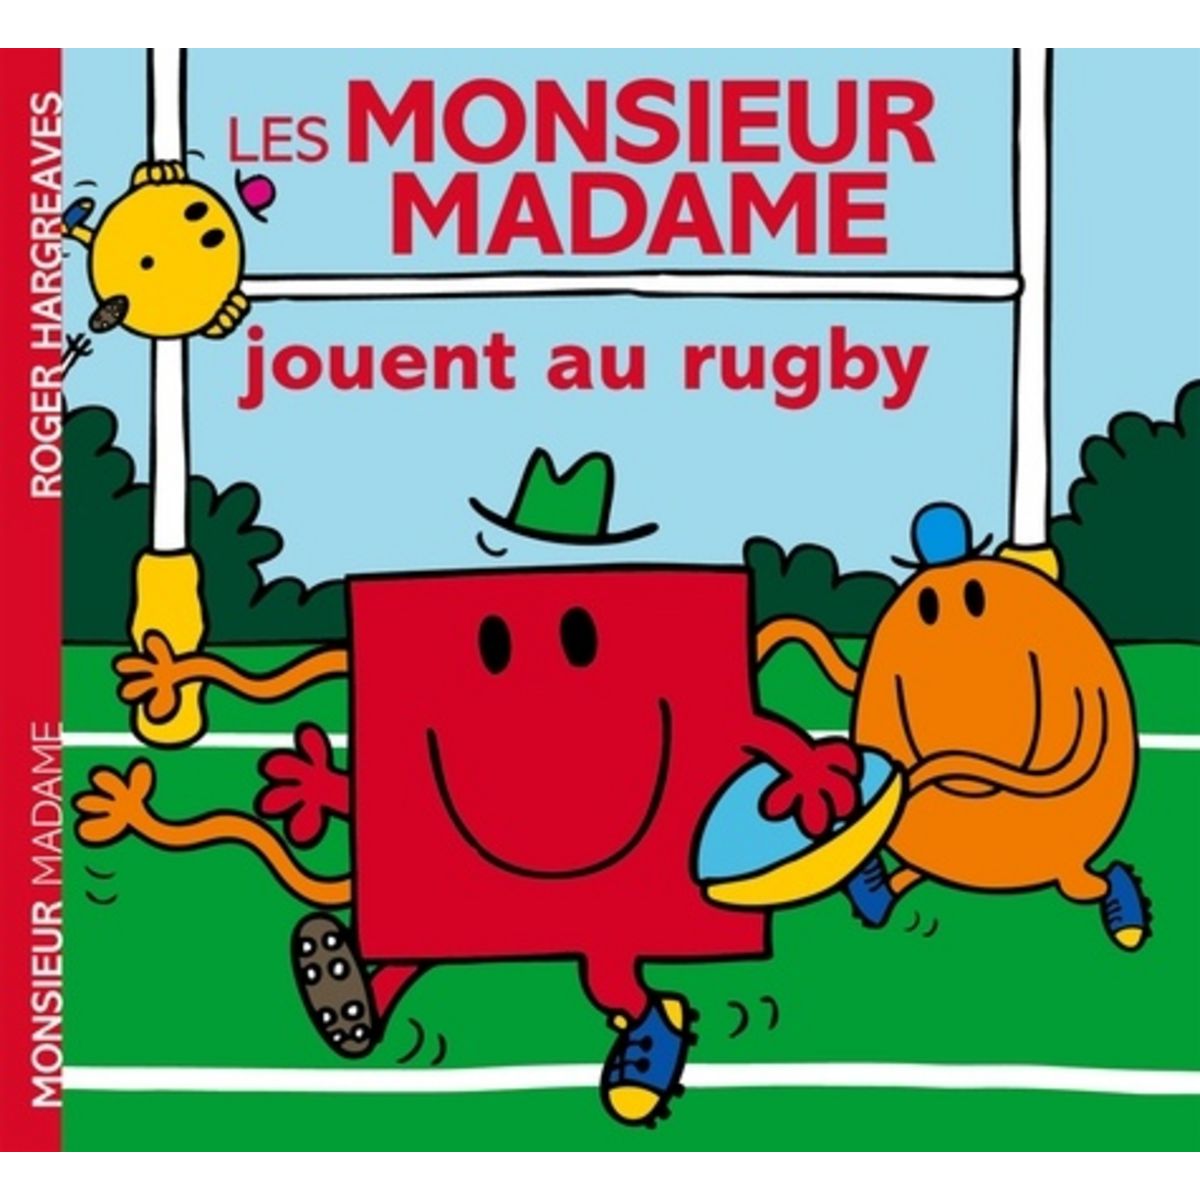  LES MONSIEUR MADAME JOUENT AU RUGBY, Hargreaves Roger